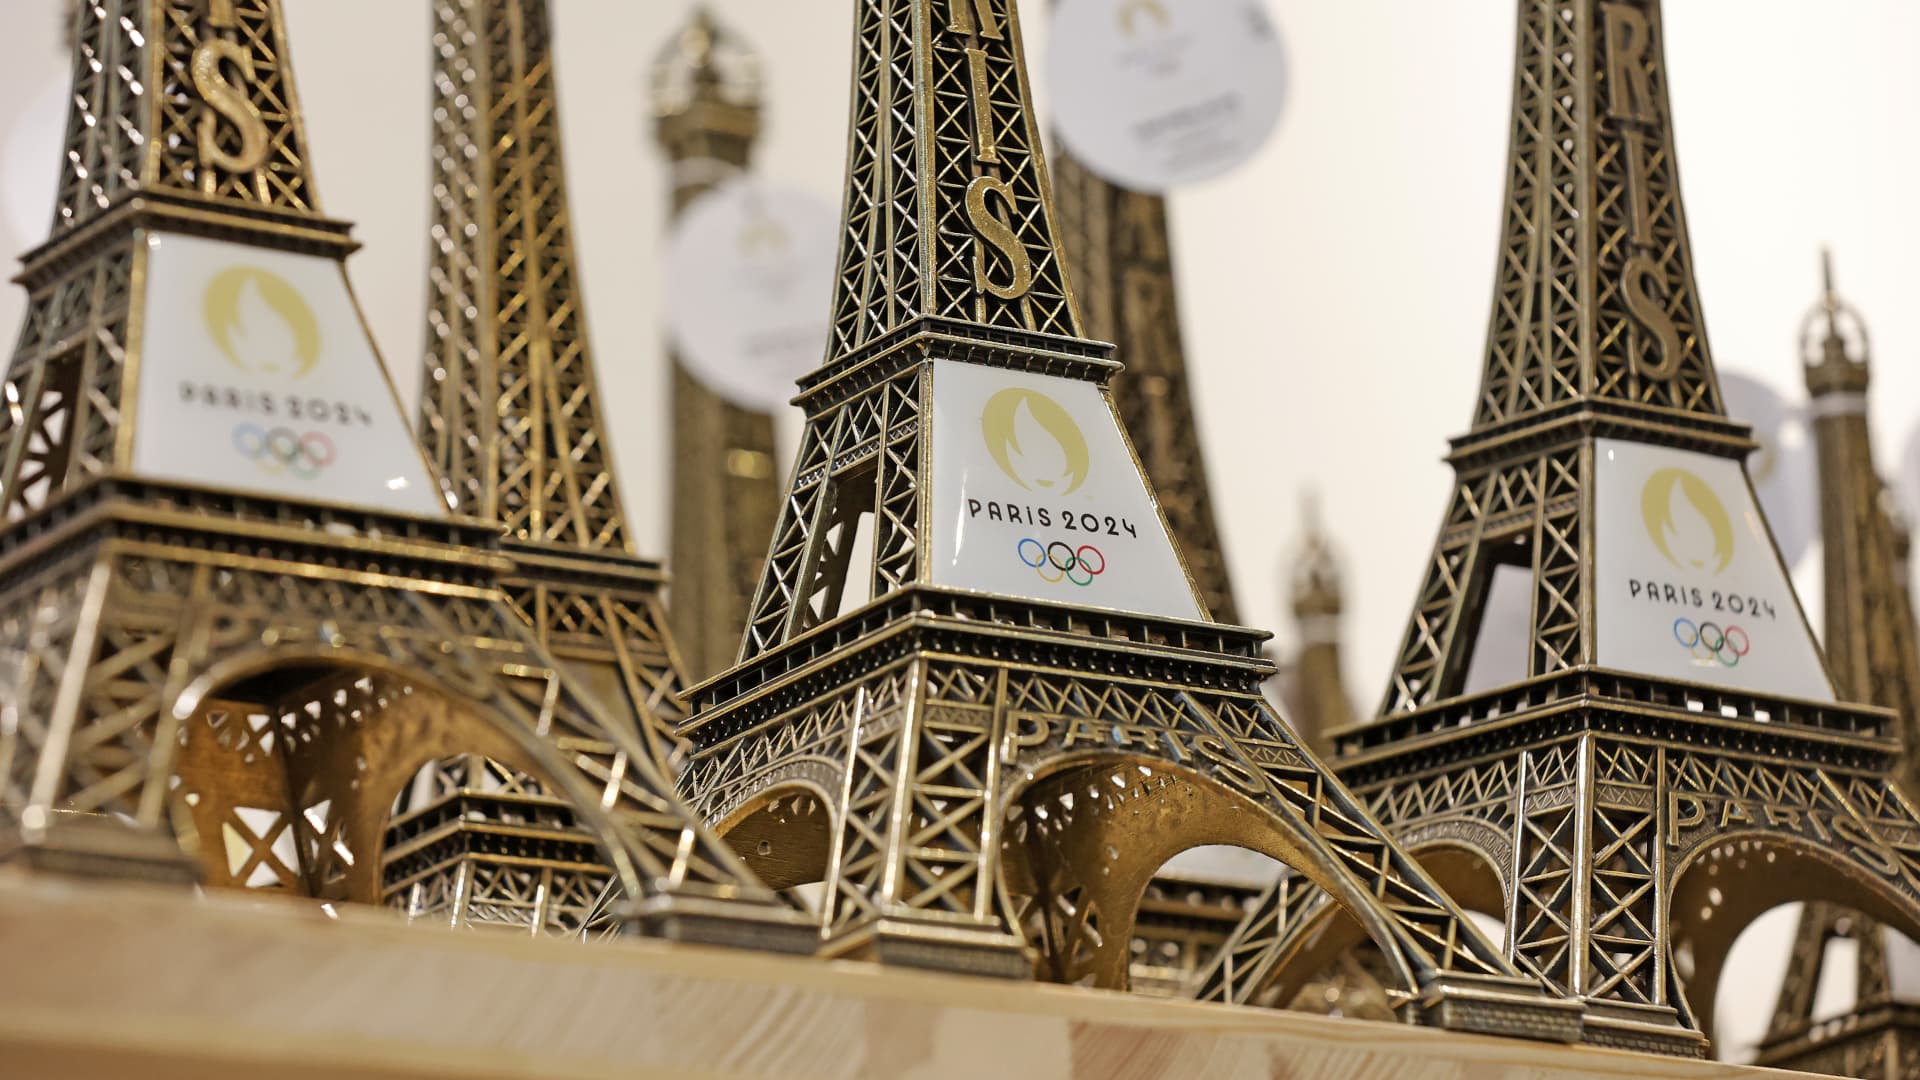 Replicas of the Eiffel Tower with the logo of the 2024 Olympic Games for the Paris 2024 Summer Olympic and Paralympic Games are displayed inside the official store entirely dedicated to the 2024 Olympic Games on November 15, 2022 in Paris, France.